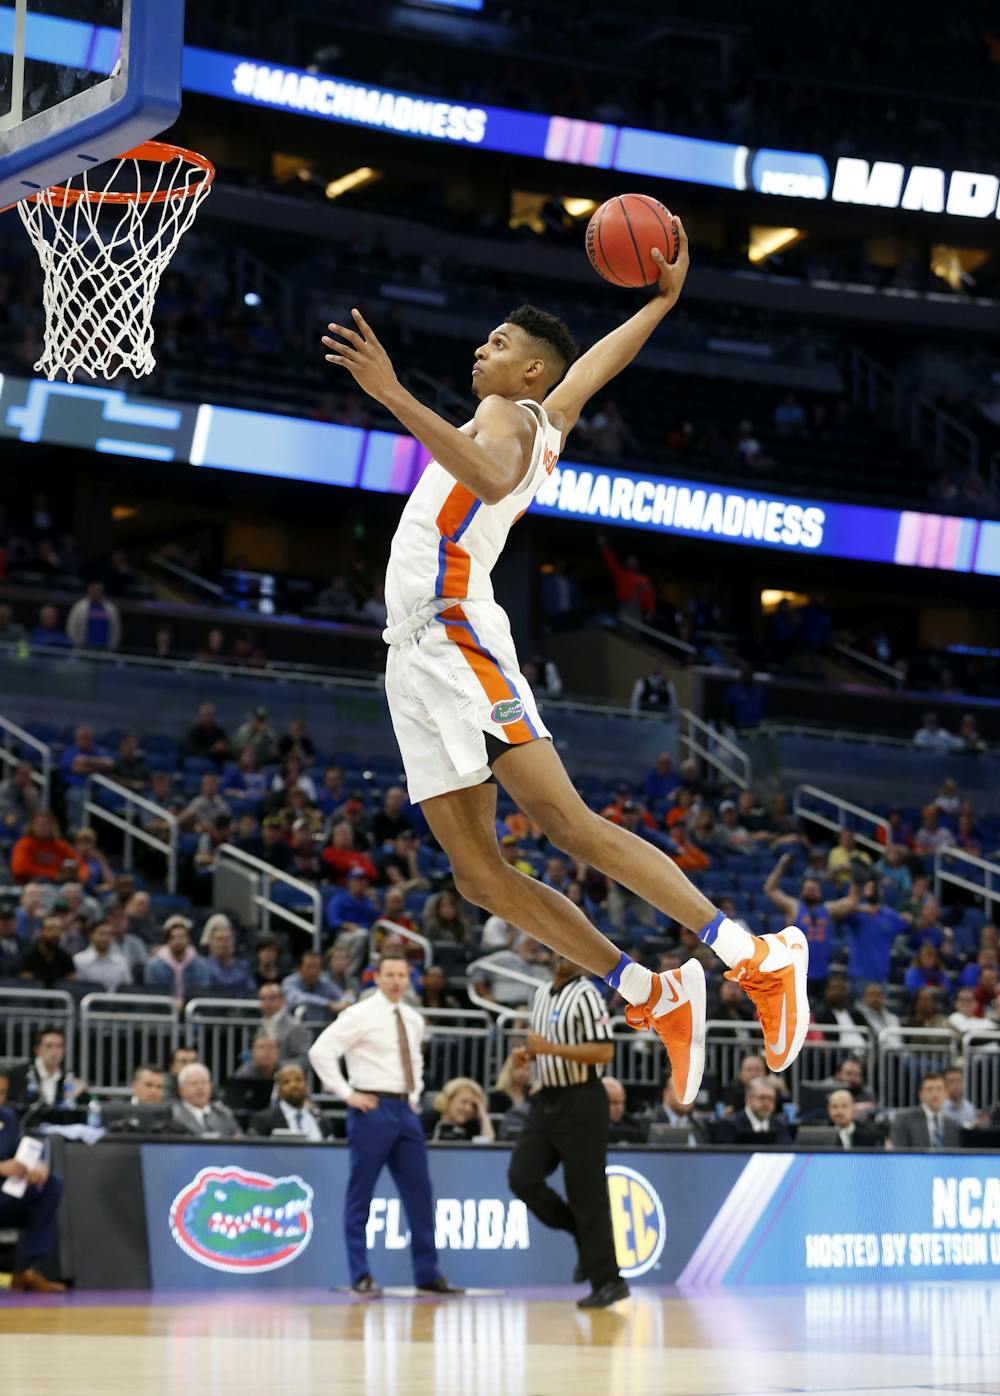 <p>Florida forward Devin Robinson dunks the ball during the second half of the first round of the NCAA college basketball tournament against East Tennessee State, Thursday, March 16, 2017 in Orlando, Fla. Florida defeated ETSU 80-65. (AP Photo/Wilfredo Lee)</p>